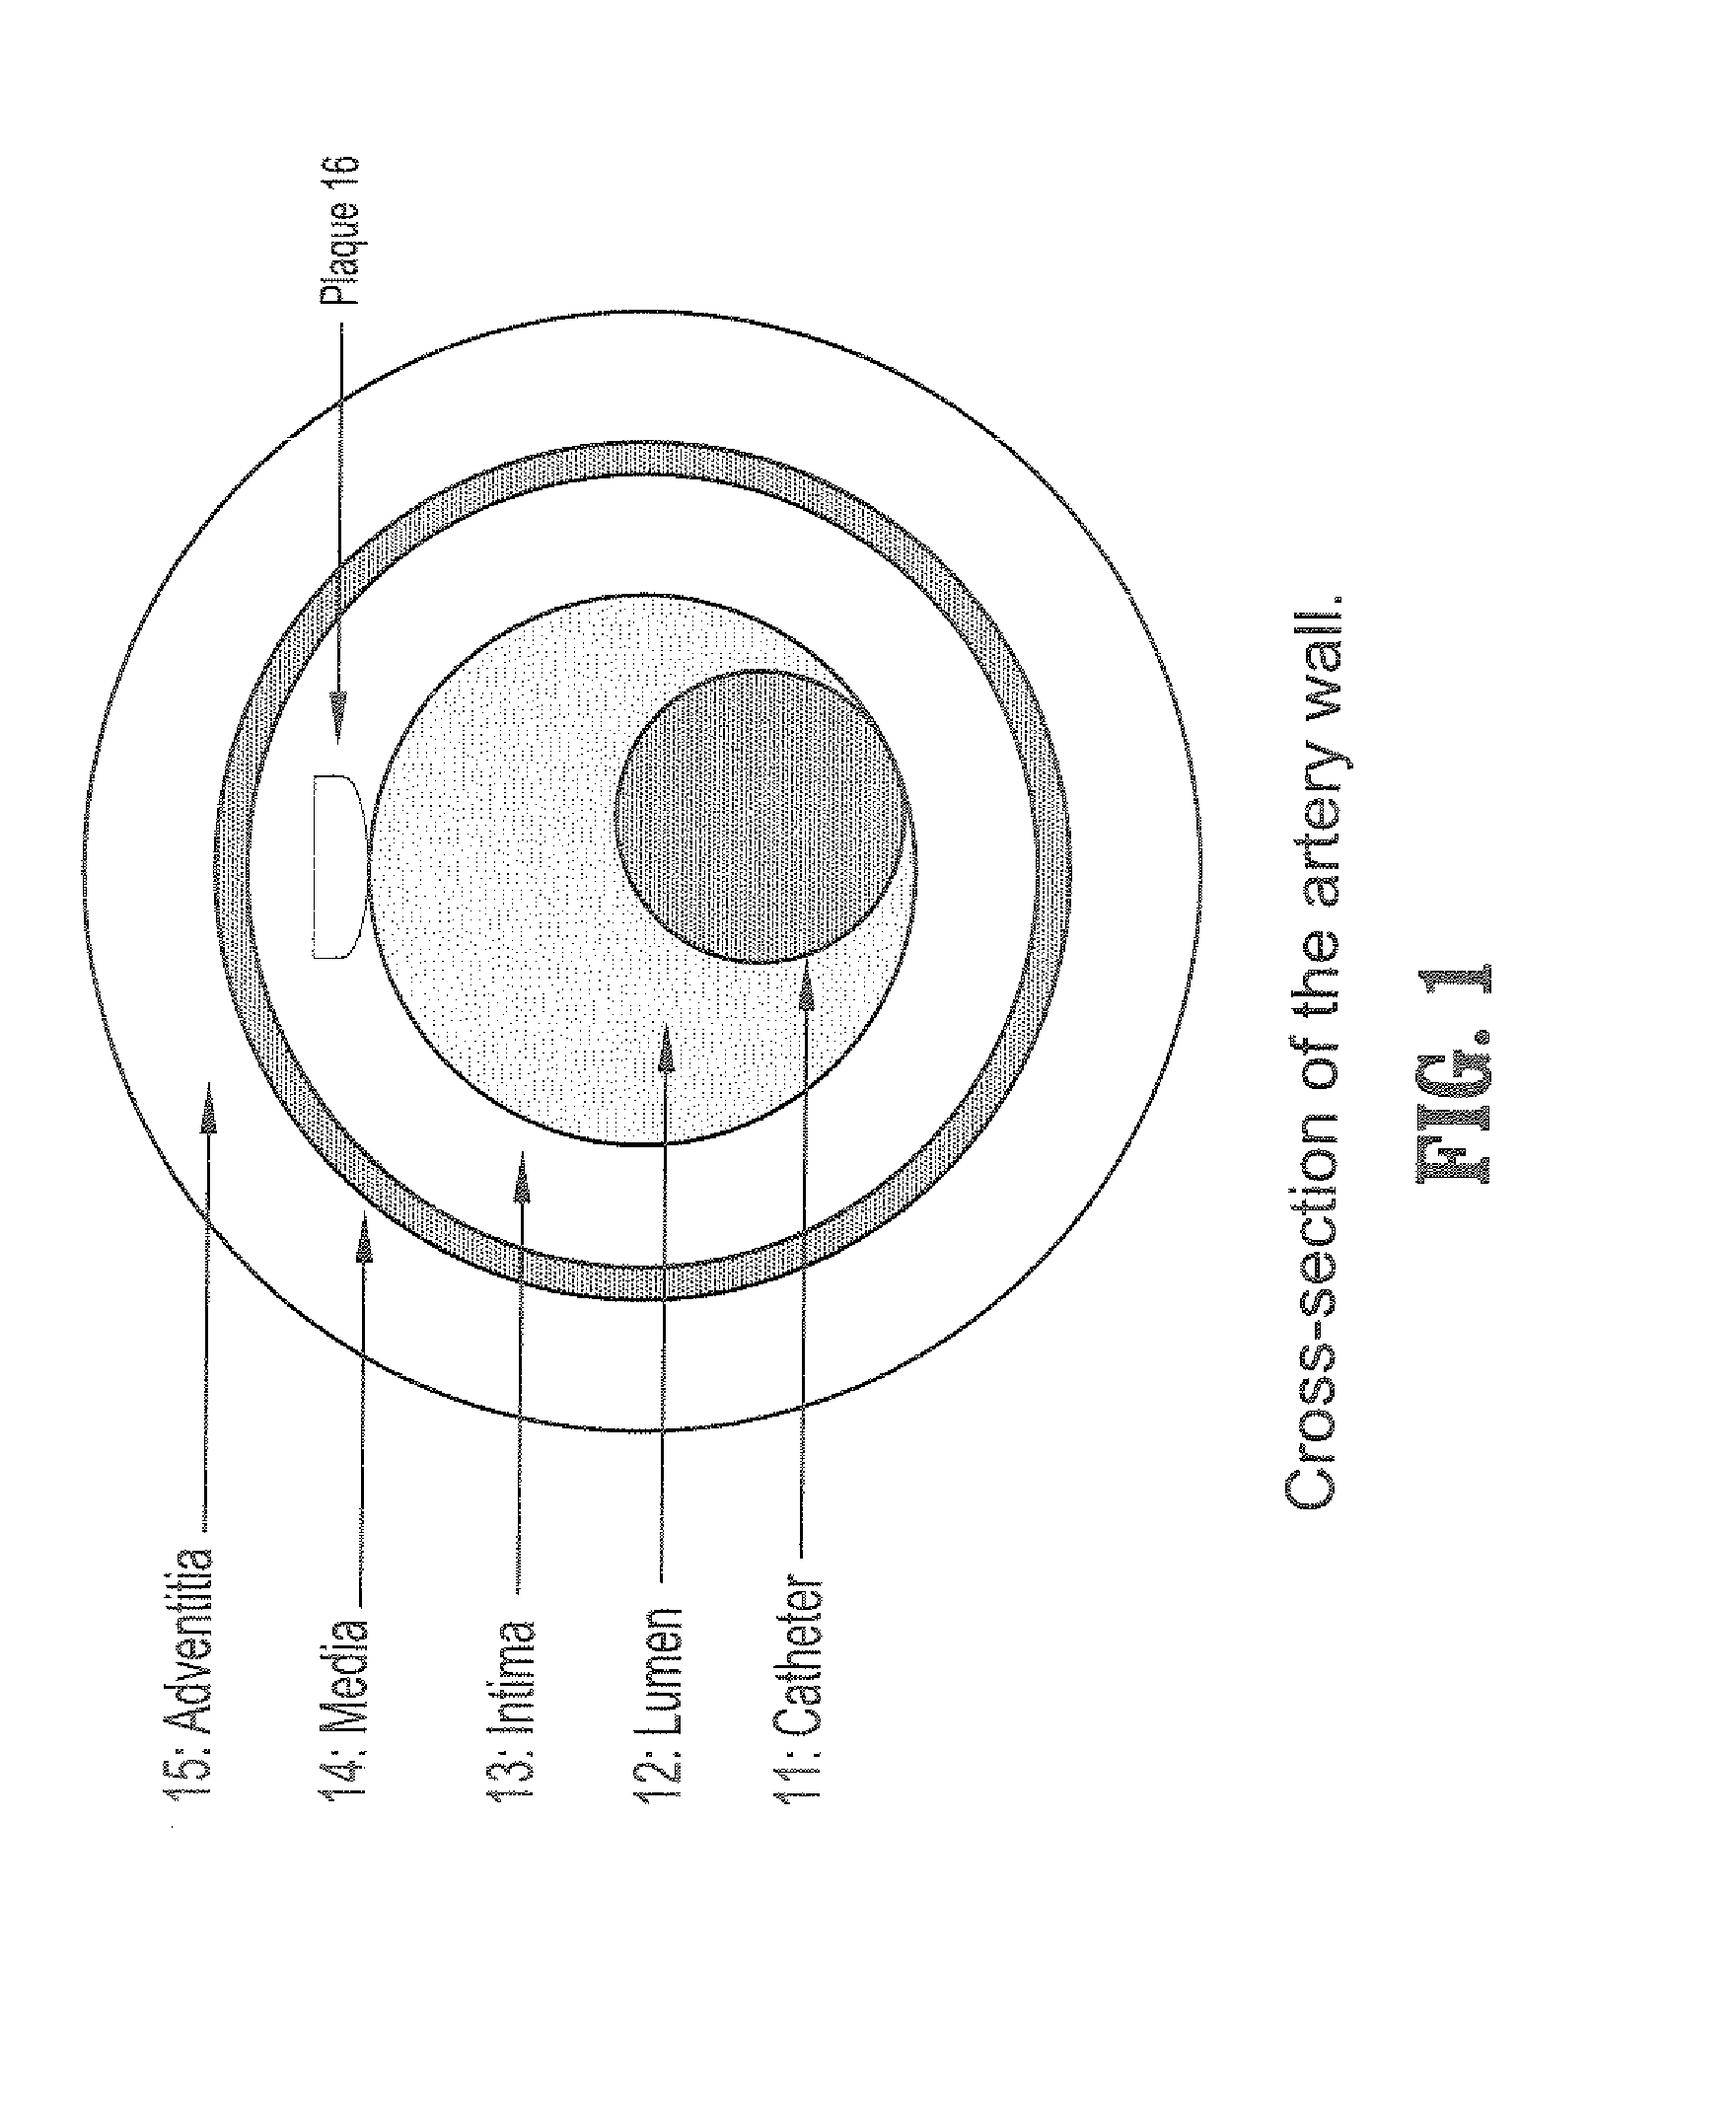 System and Method For Statistical Shape Model Based Segmentation of Intravascular Ultrasound and Optical Coherence Tomography Images